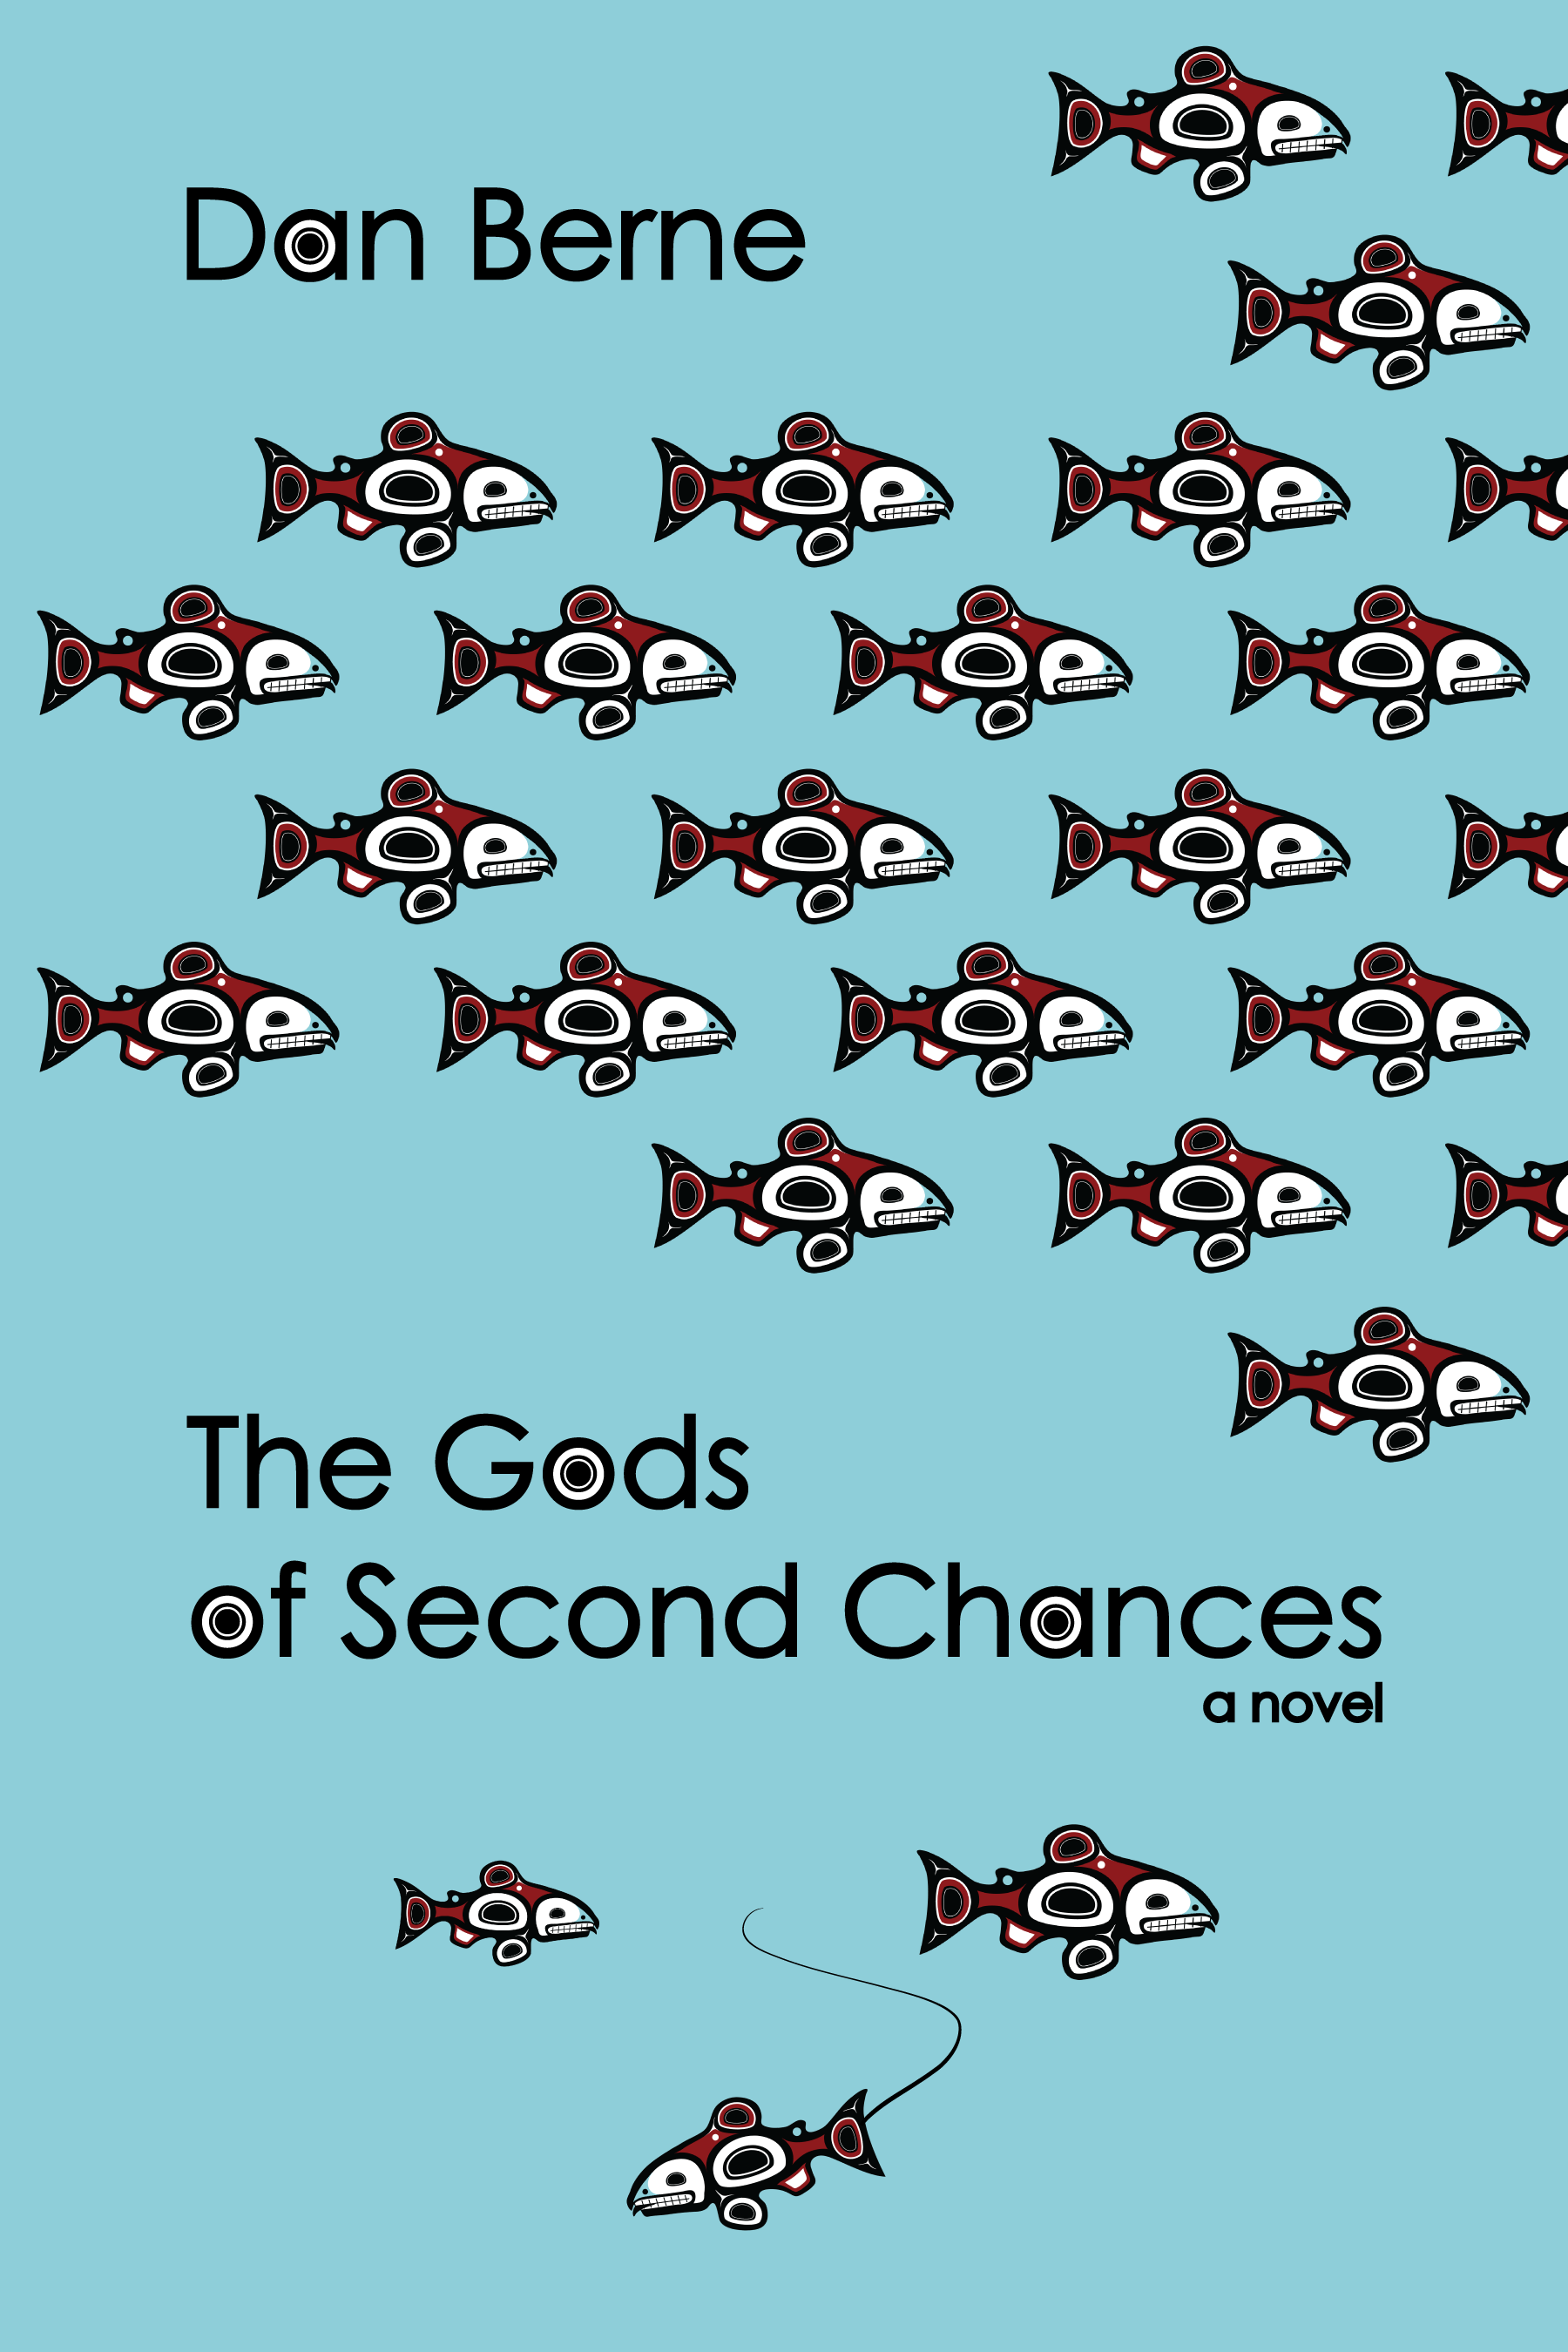 The Gods of Second Chances